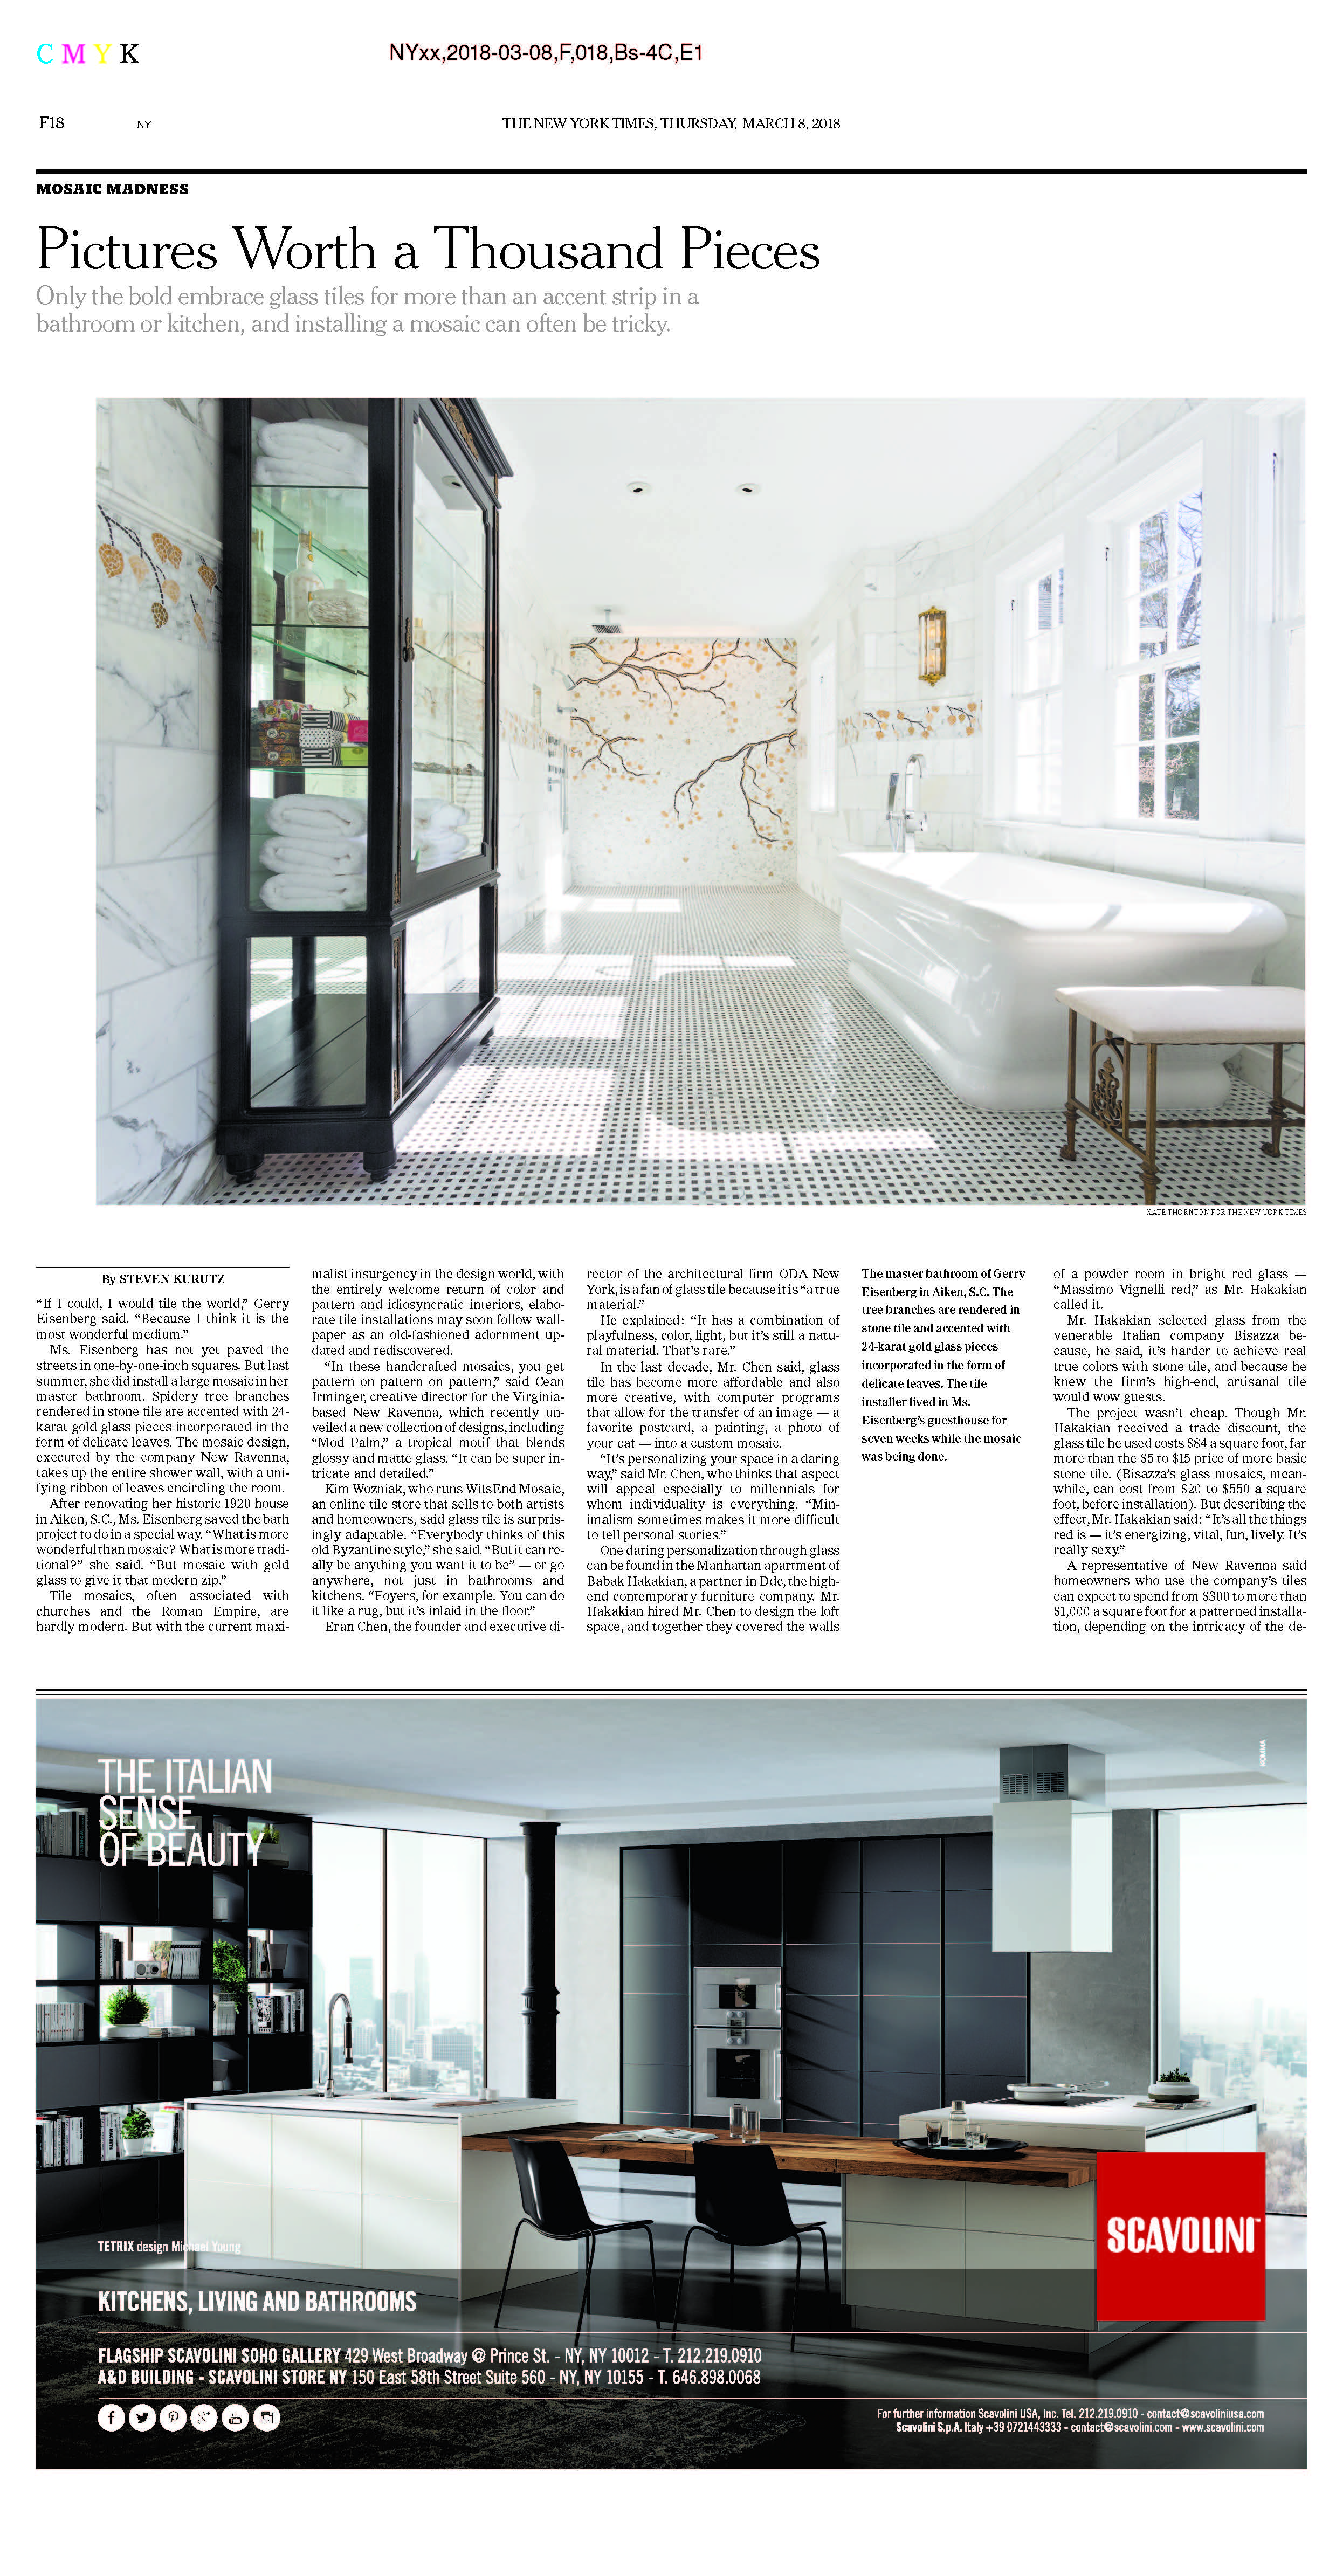 new ravenna mod palm is featured by the new york times along with other mosaic tile patterns for interiors